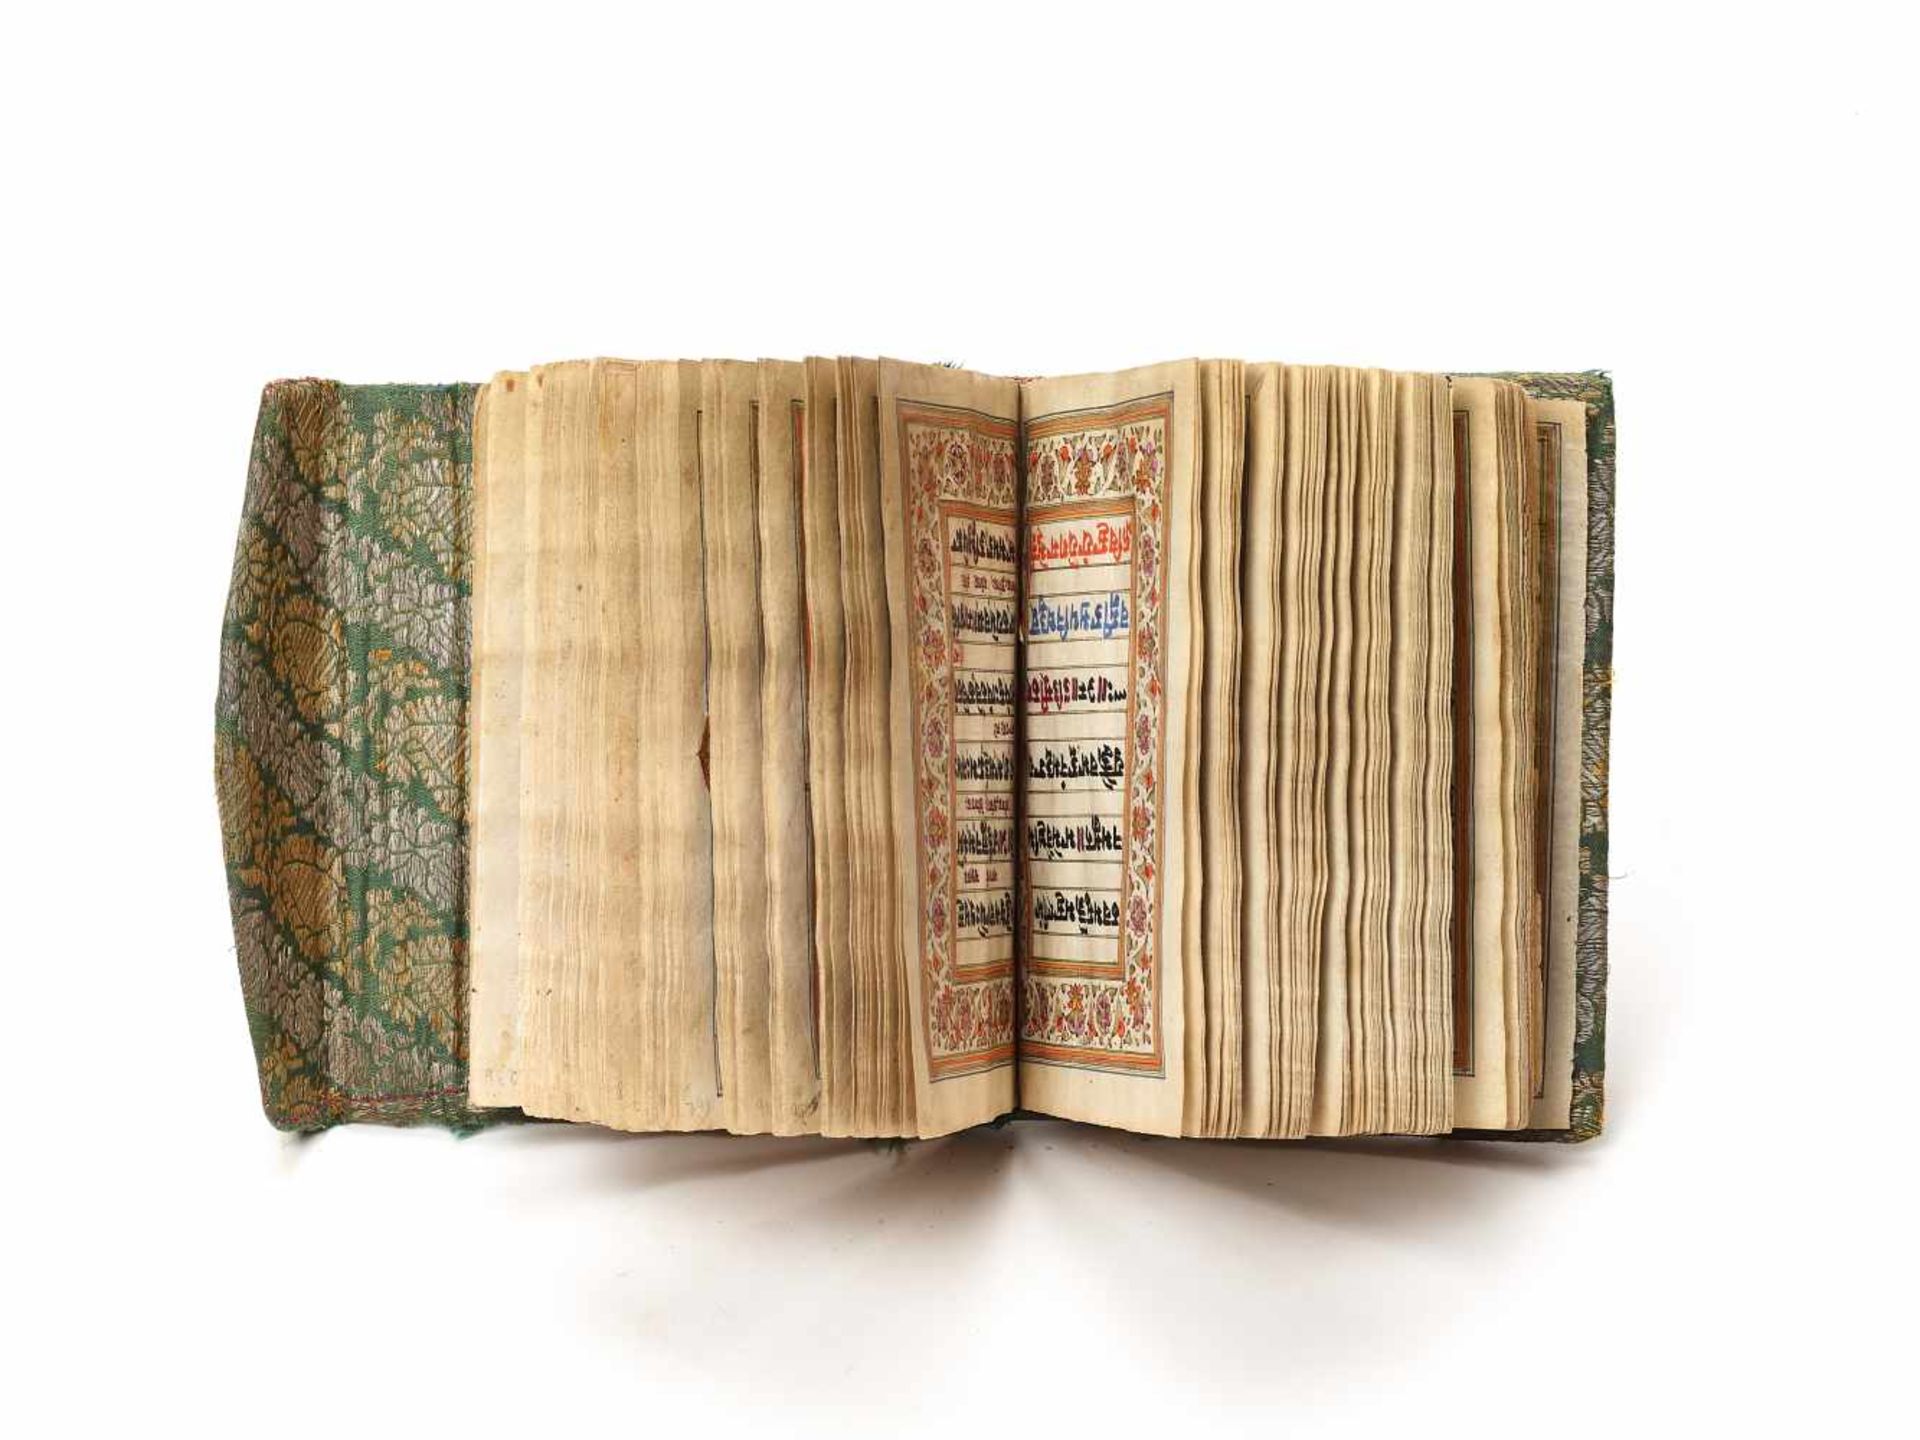 AN INDIAN MANUSCRIPT - 19th CENTURYFabric cover with inside paper pages, hand painted with colors